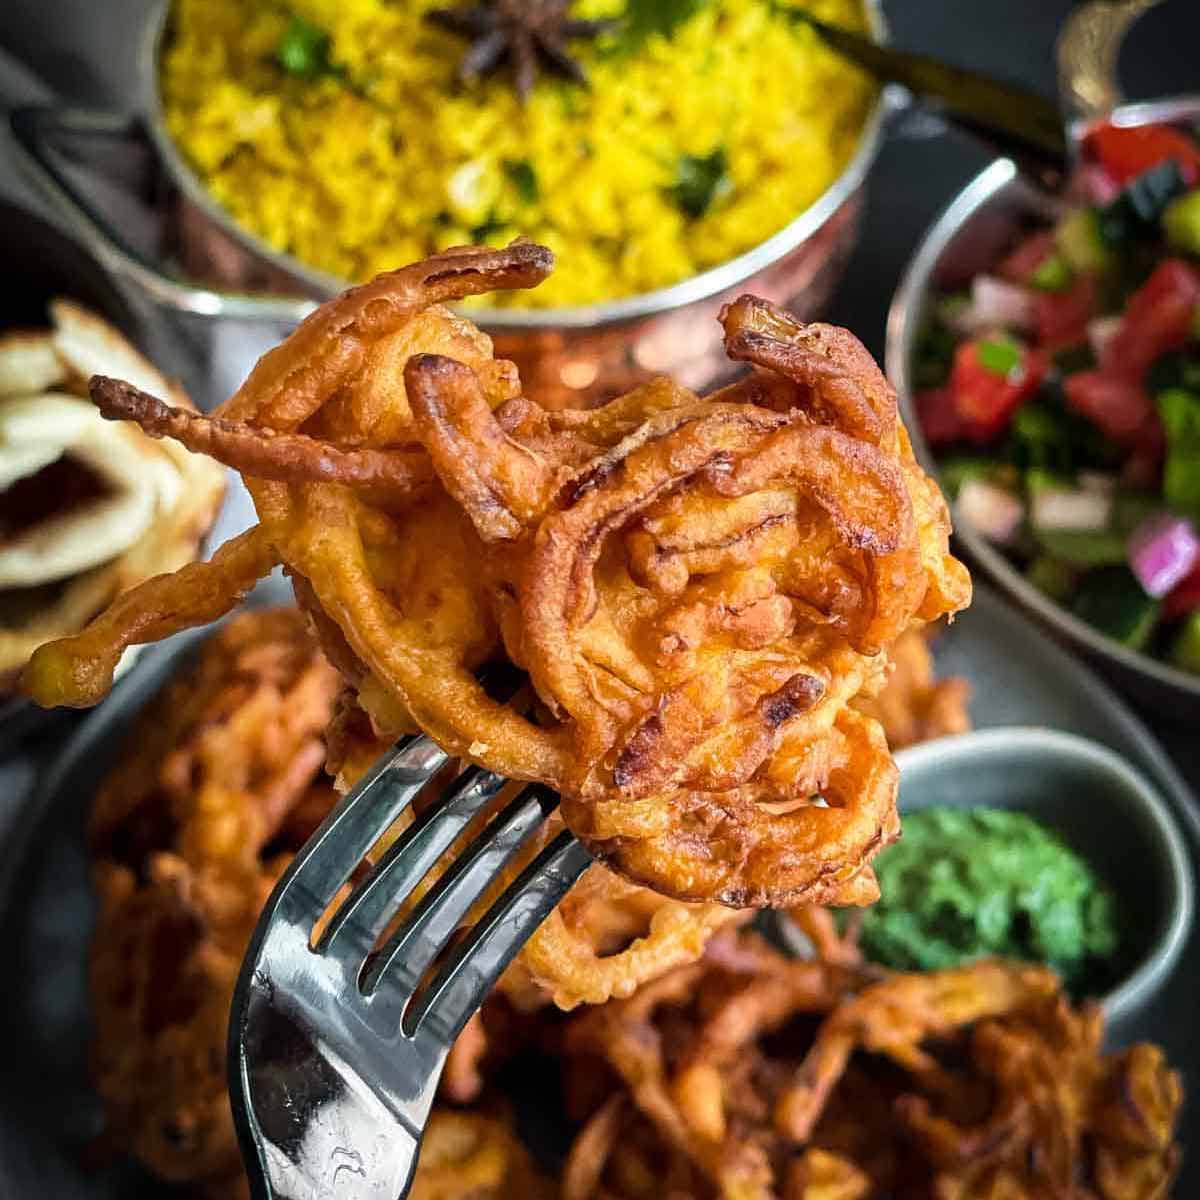 A close-up of a fork inserted into onion bhaji.